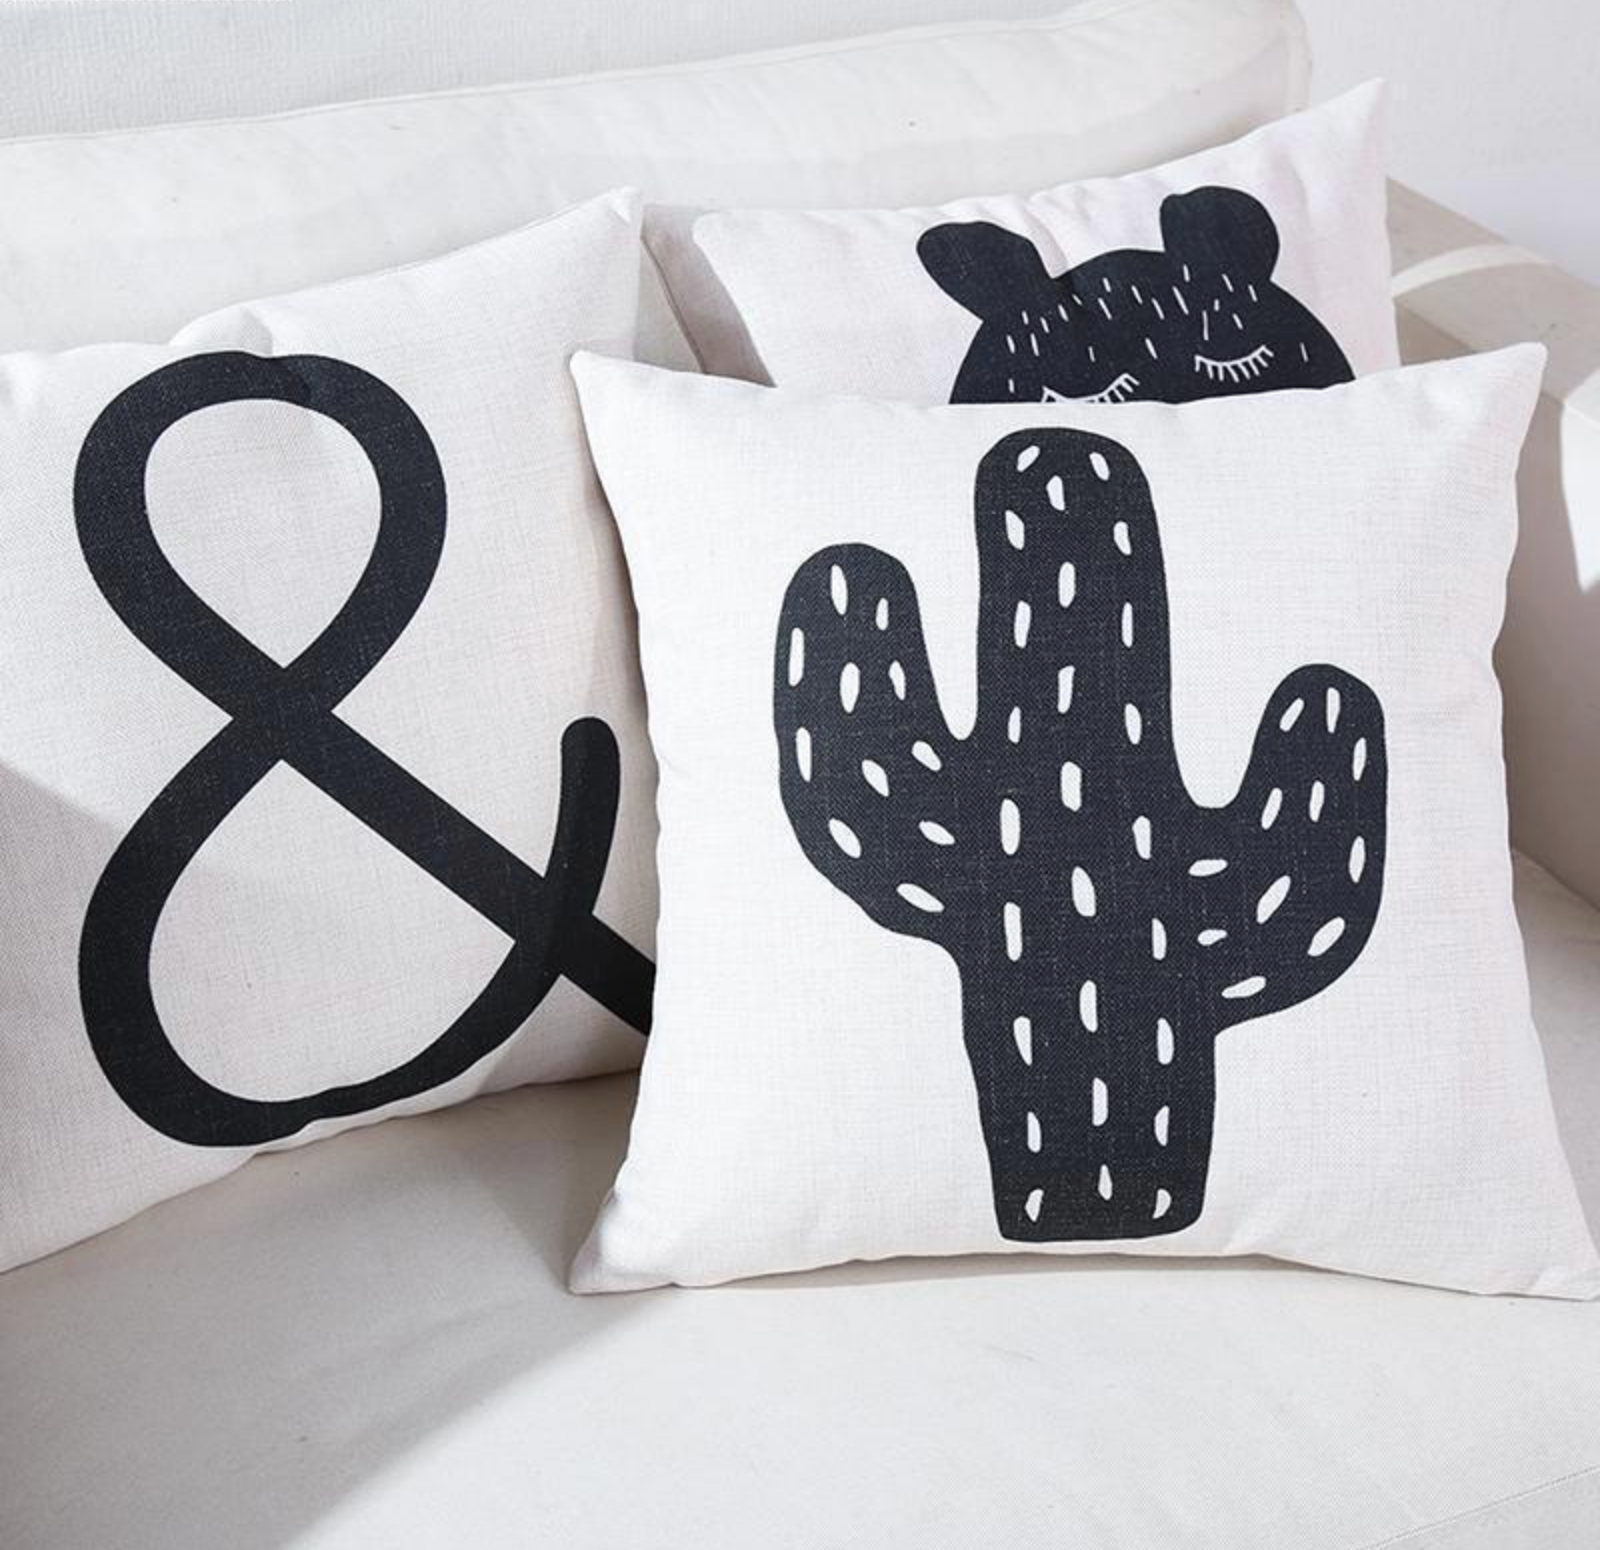 Nordic Style Cushion Covers - Cactus, Bear, Pine Tree, Arrow - Just Kidding Store